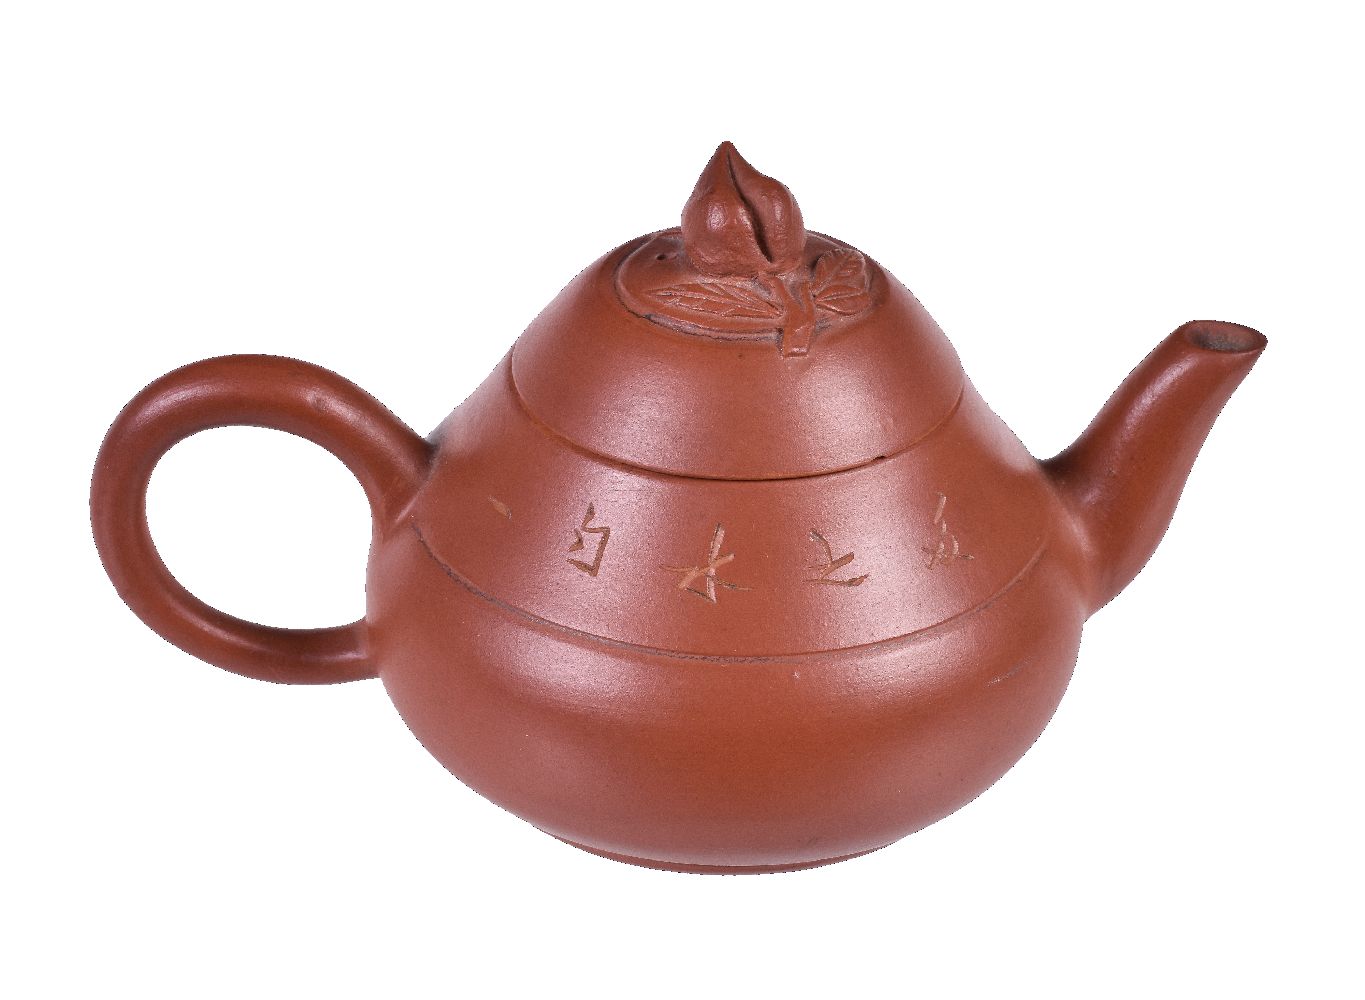 A Chinese inscribed Yixing teapot